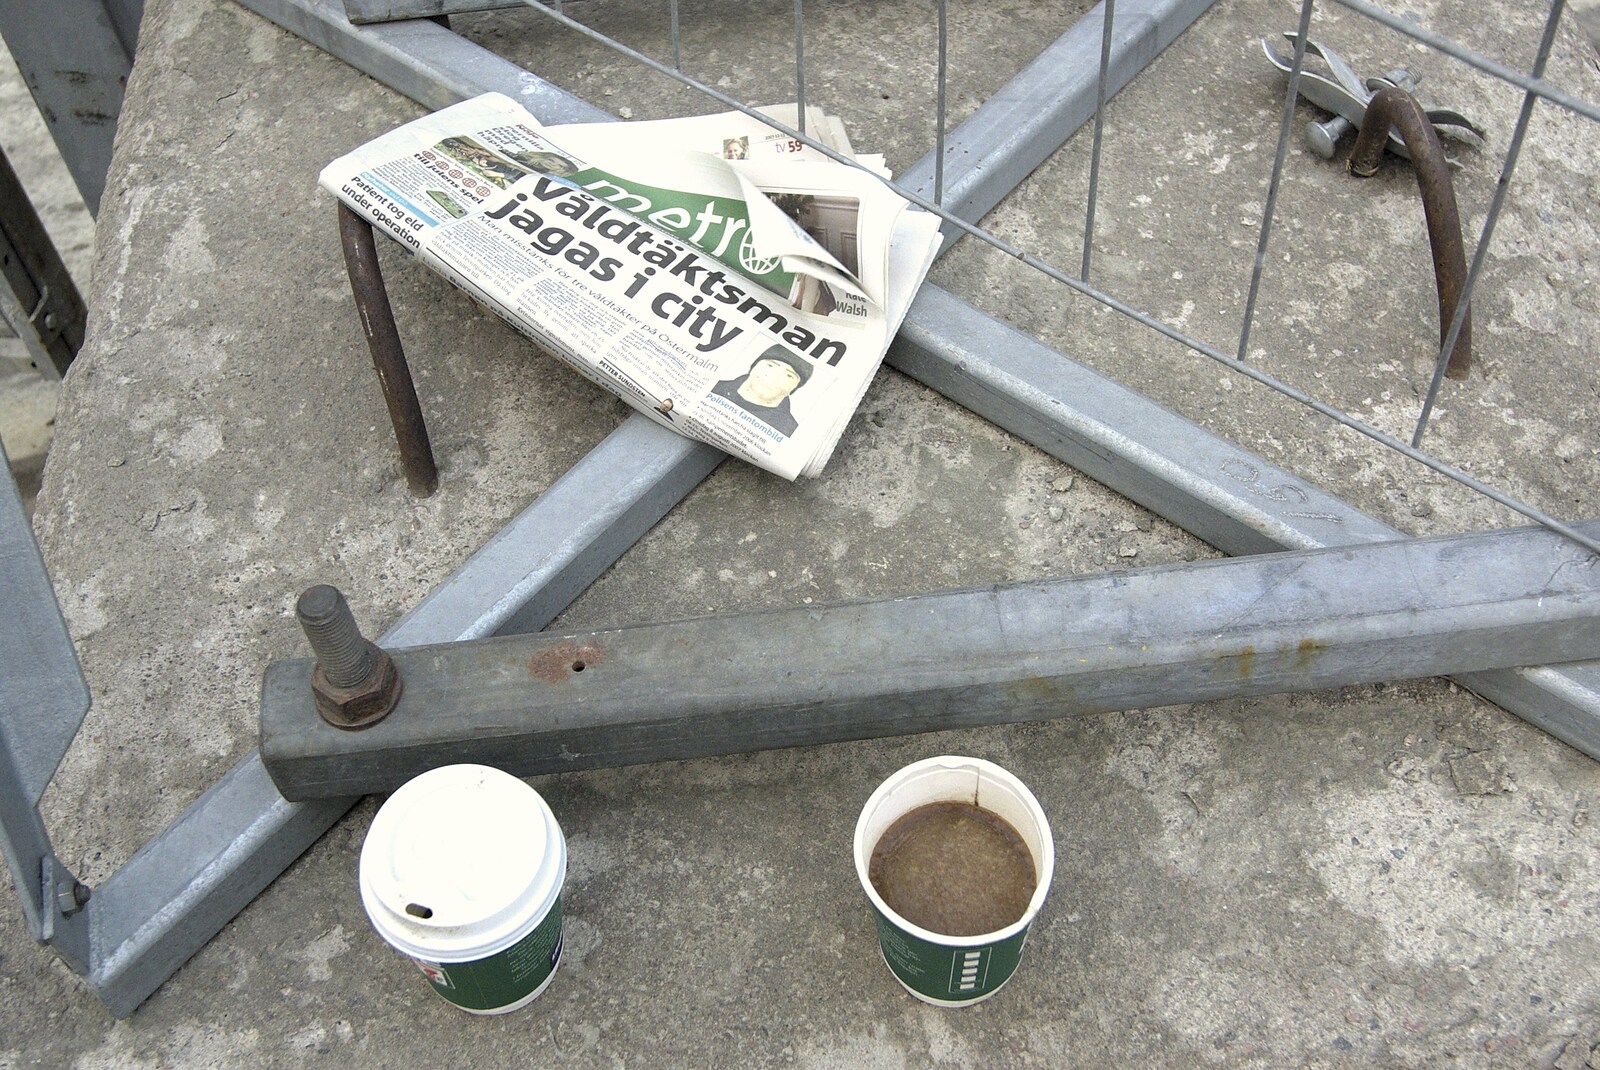 A discarded newspaper and frozen coffee from A Few Hours in Skansen, Stockholm, Sweden - 17th December 2007